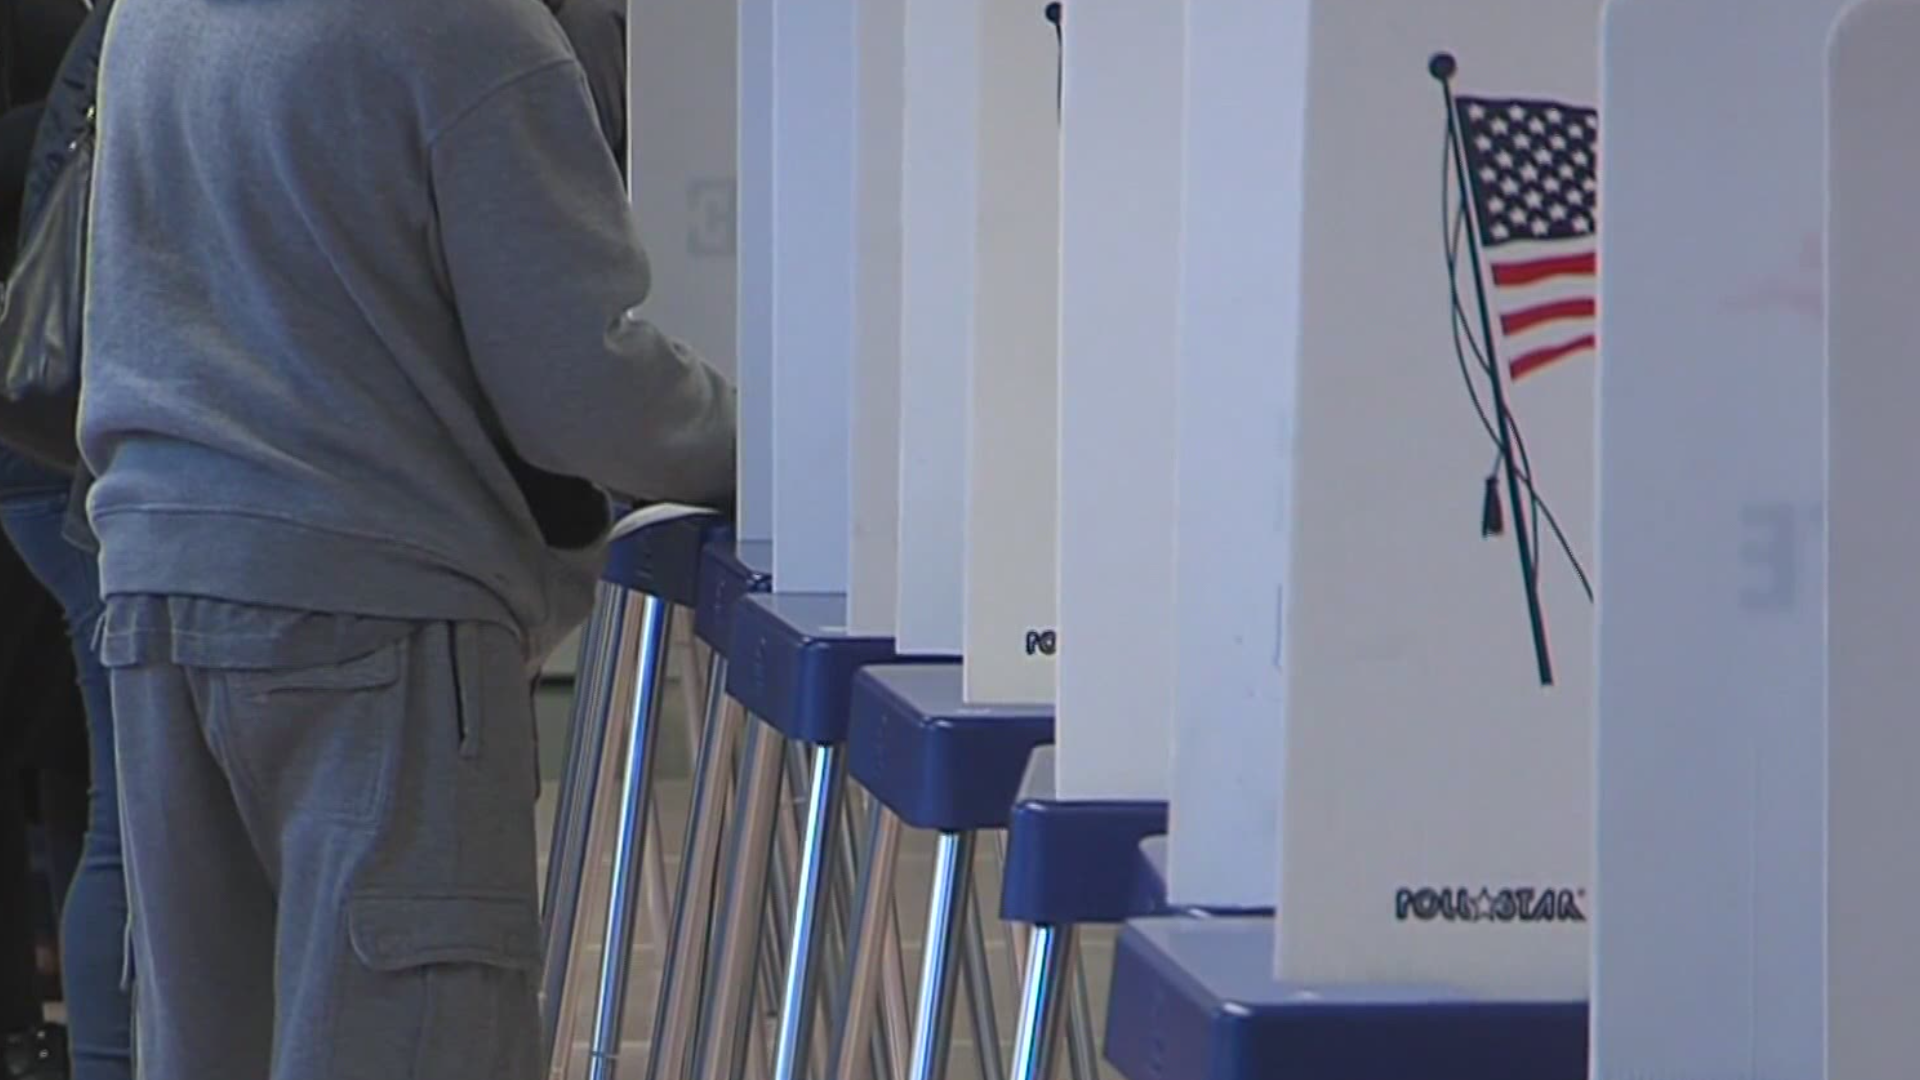 Virginia Beach city leaders said the current voting system will change in 2022.